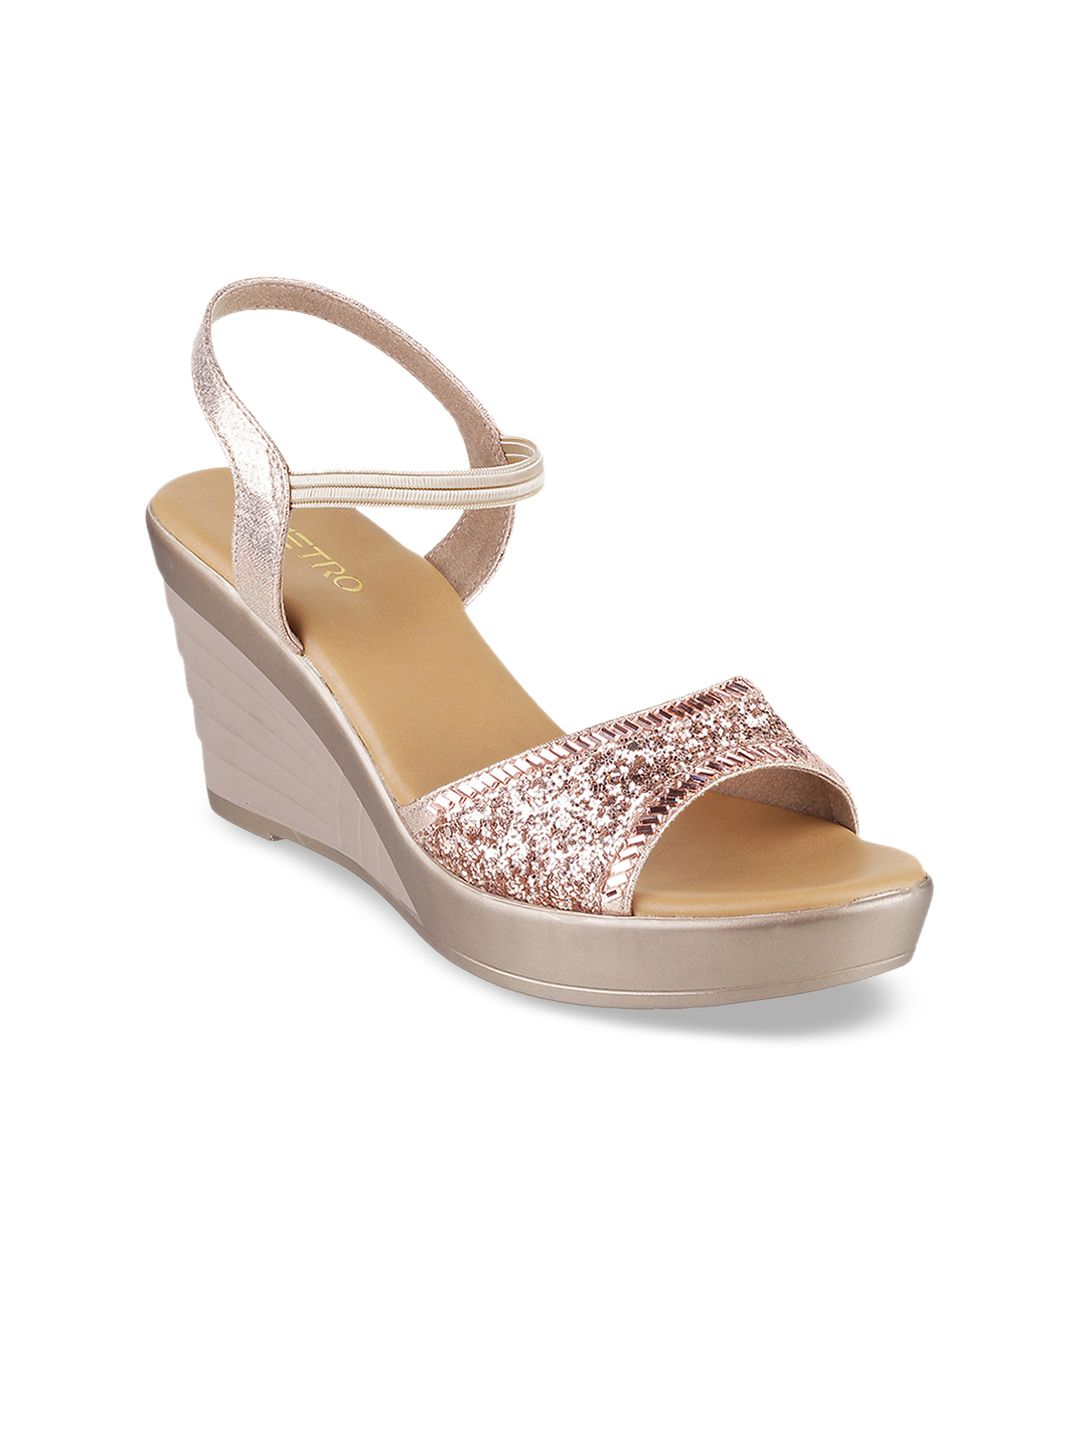 Metro Women Gold-Toned Embellished Sandals Price in India